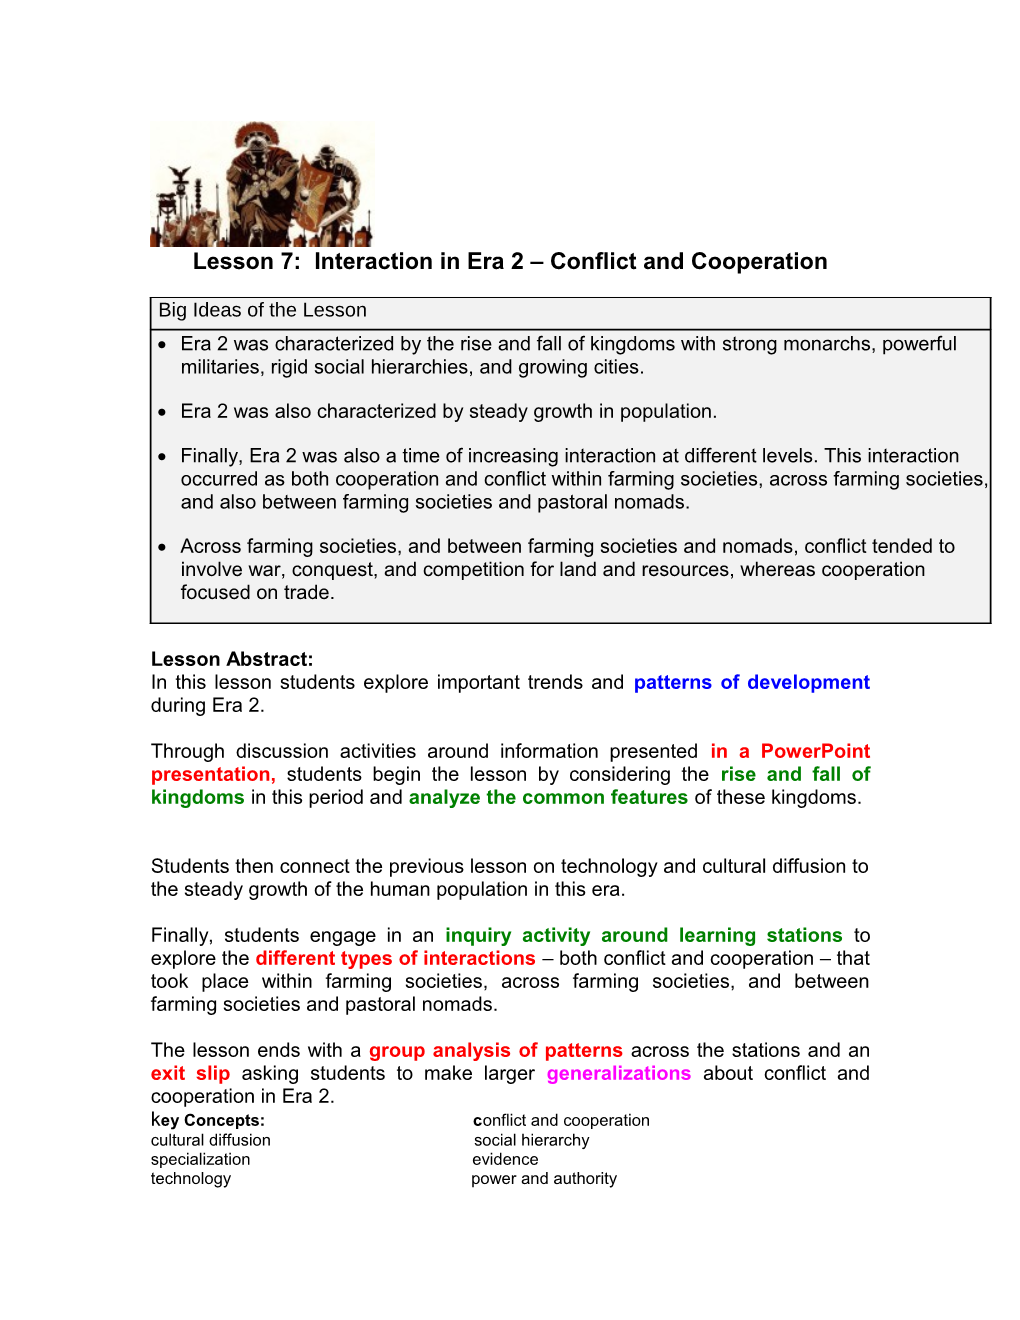 Lesson 7: Interaction in Era 2 Conflict and Cooperation s1